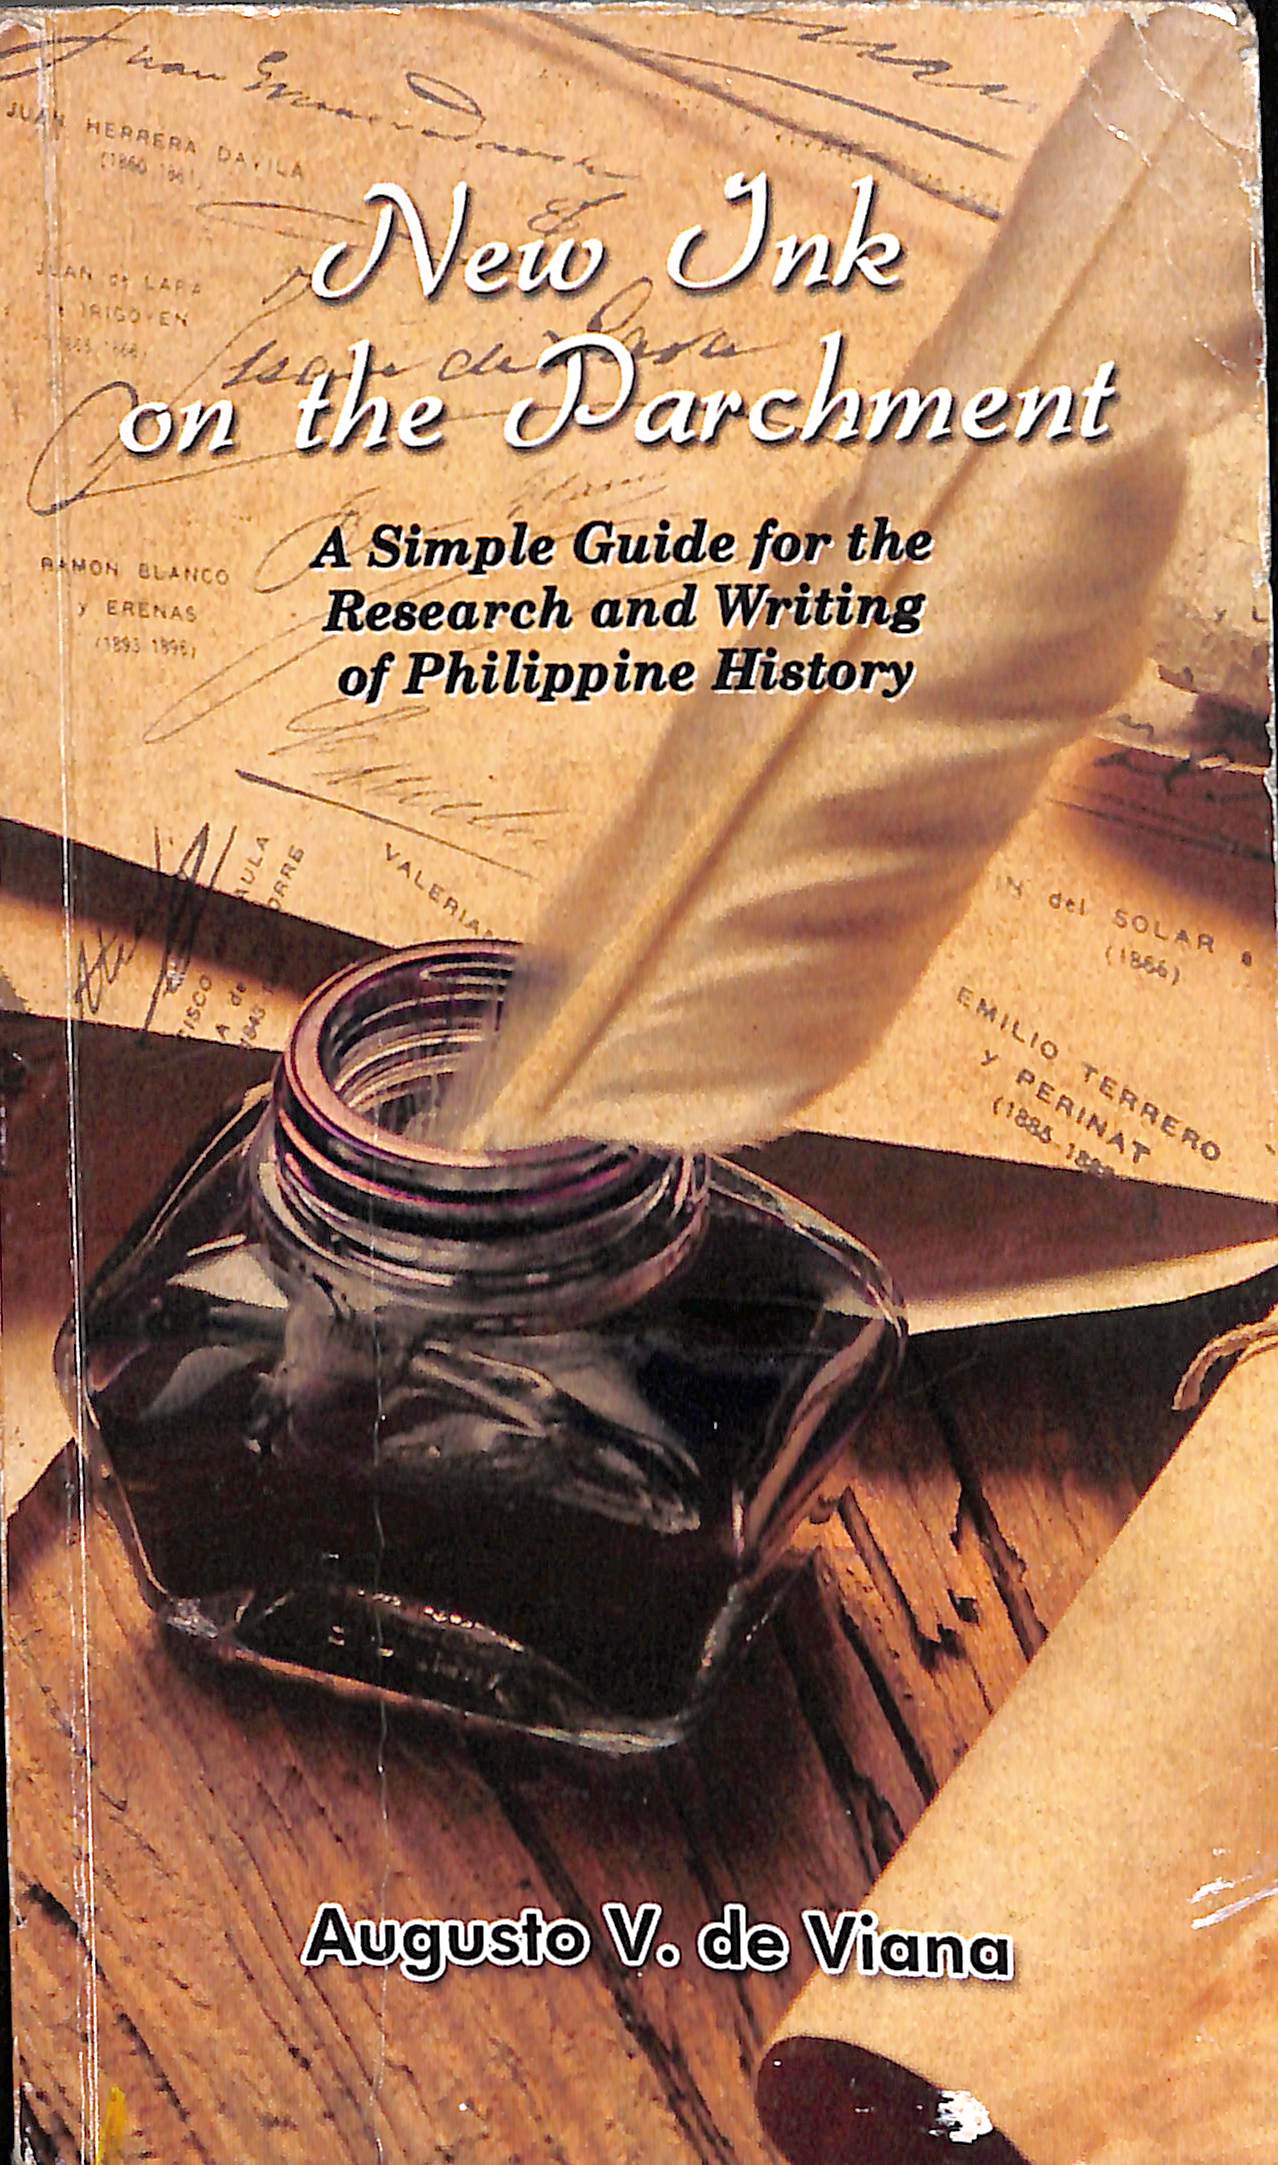 New ink on the parchment a simple guide for the research and writing of Philippine history